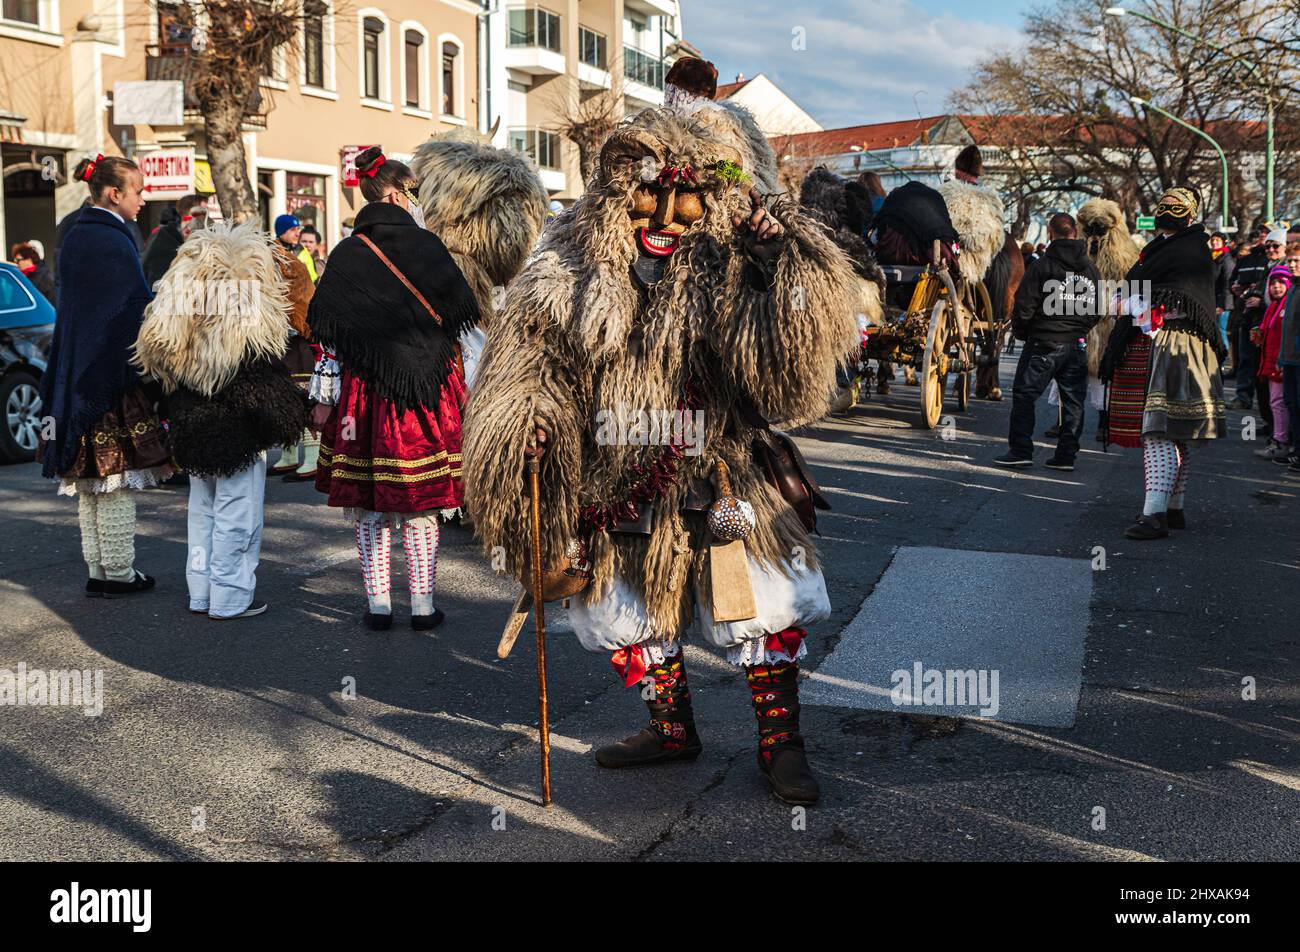 02.28.2022. Mohacs hungary. carnival festival when the winter is ending. Preformers wearing Traditional clotes and masks. They are dancing, walking, Stock Photo